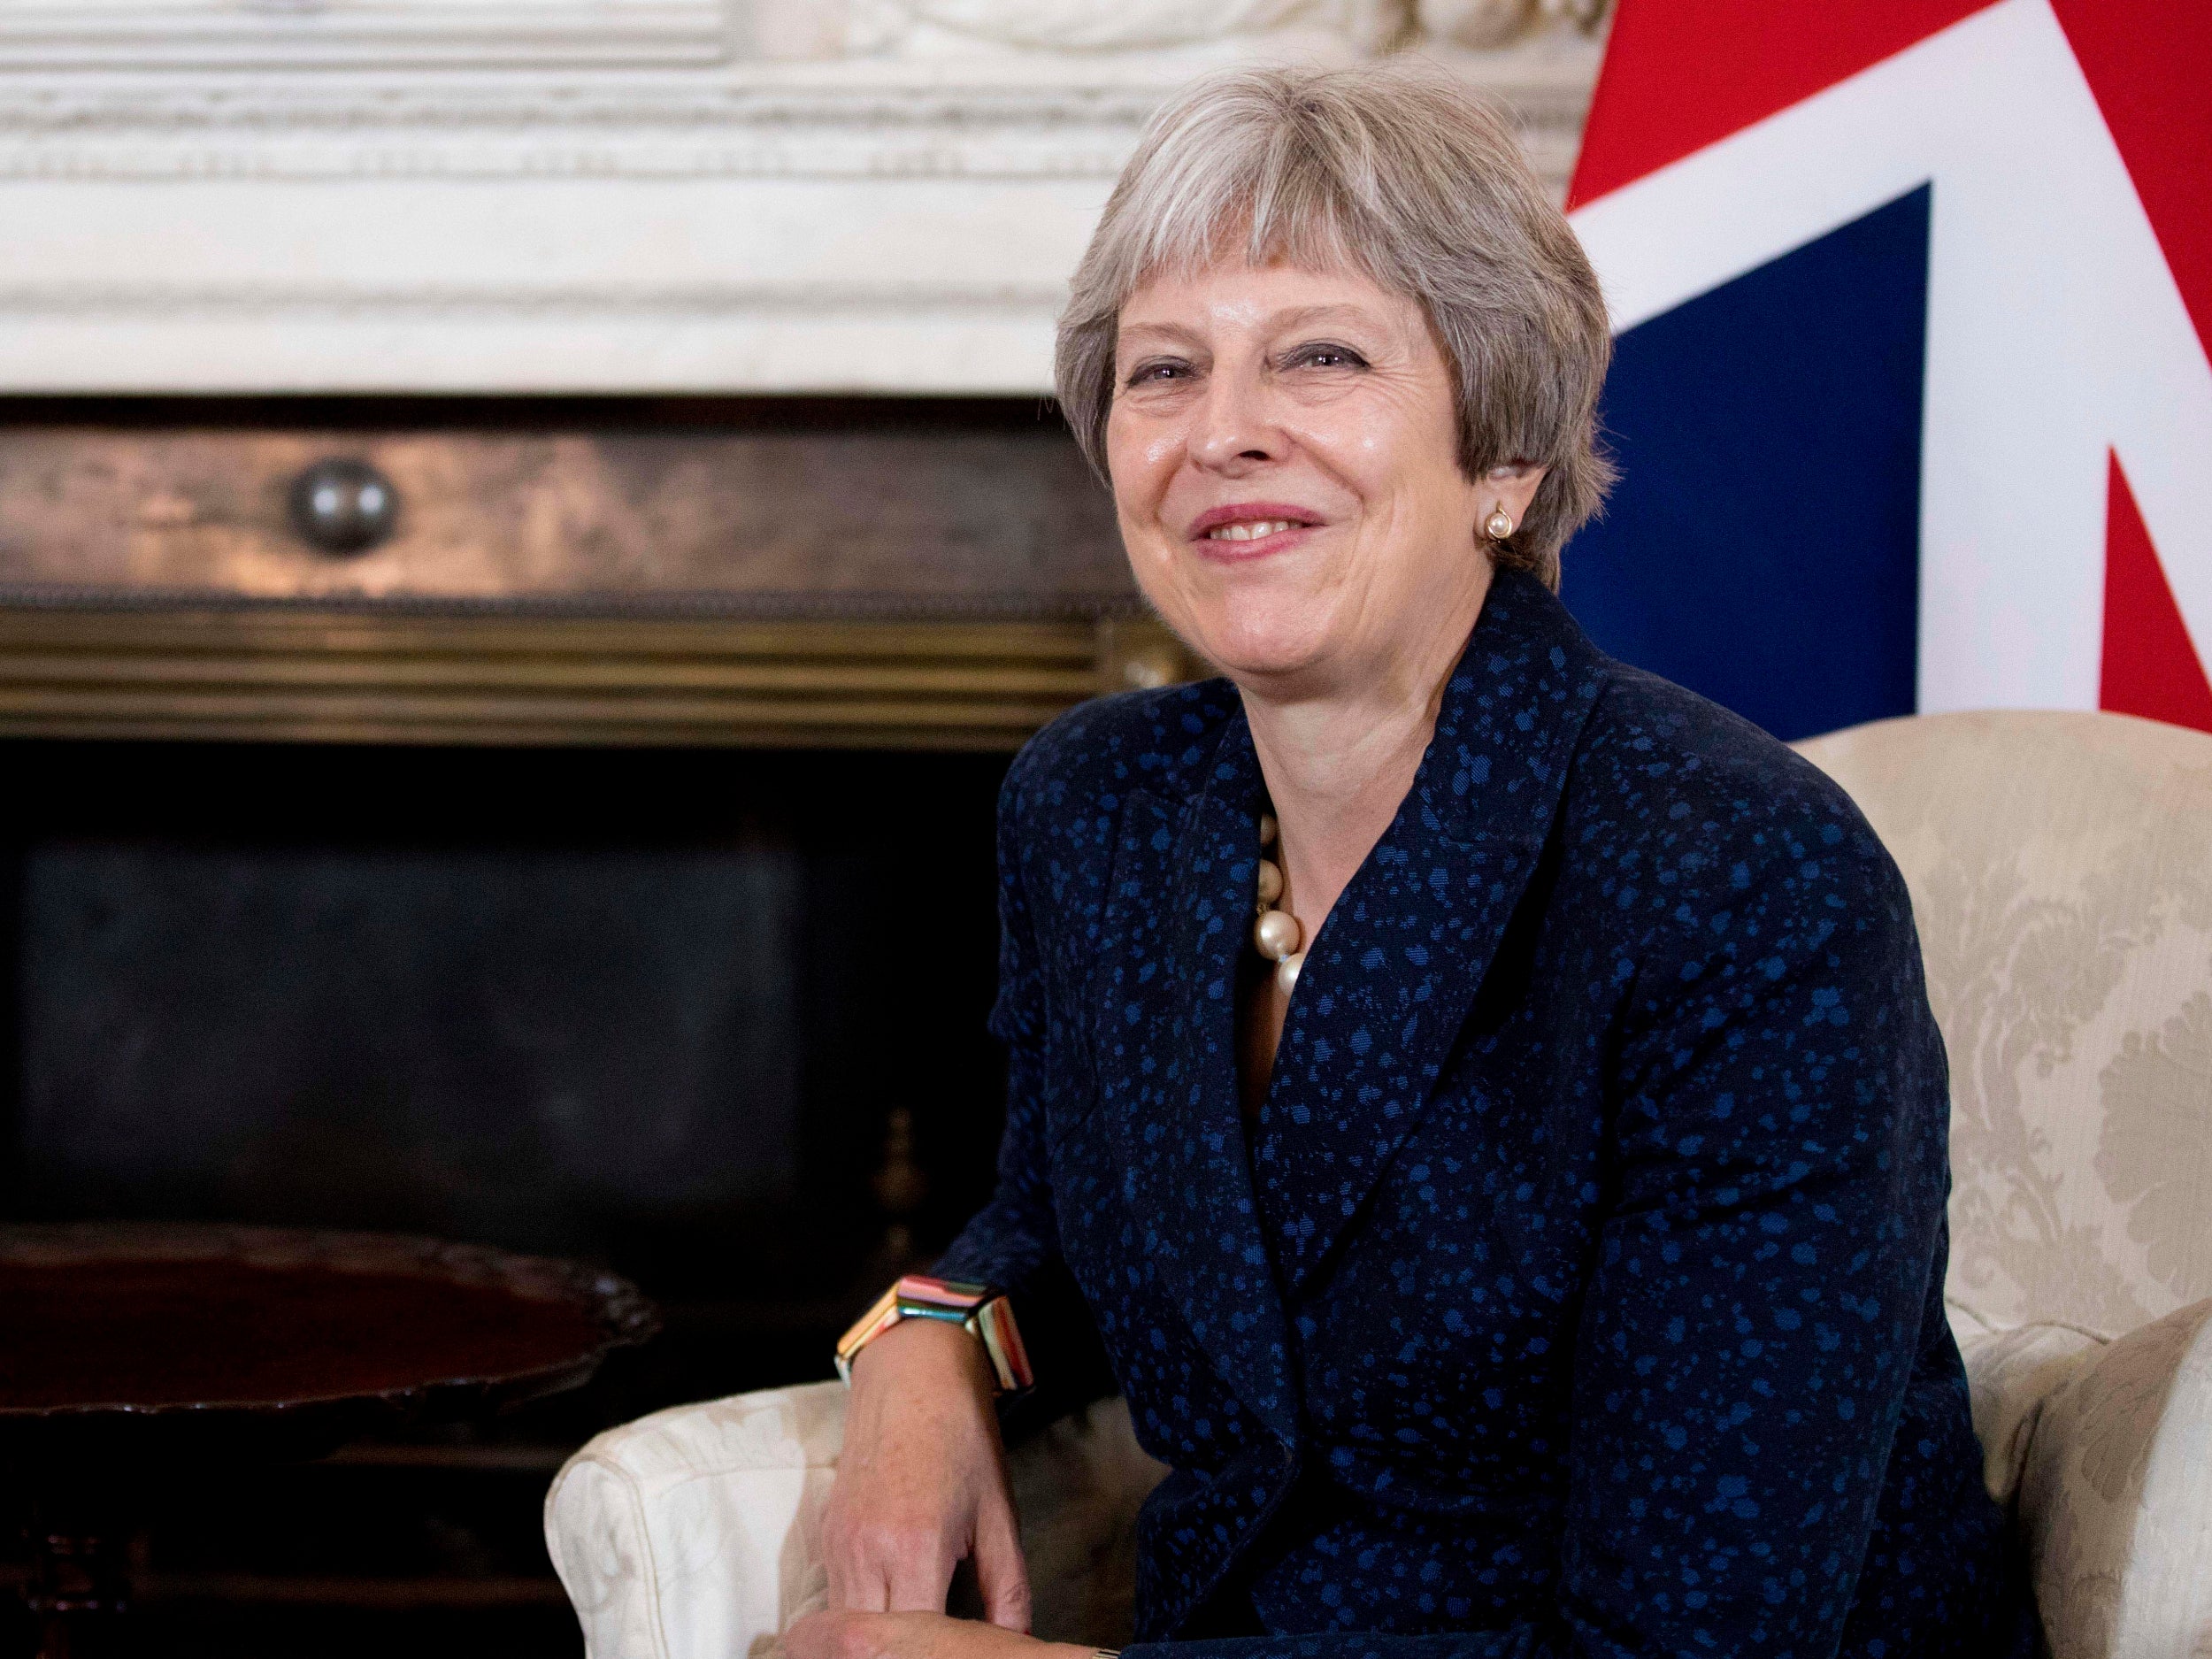 PM already faces intensifying pressure from the pro-Brexit wing of her party over Chequers plans